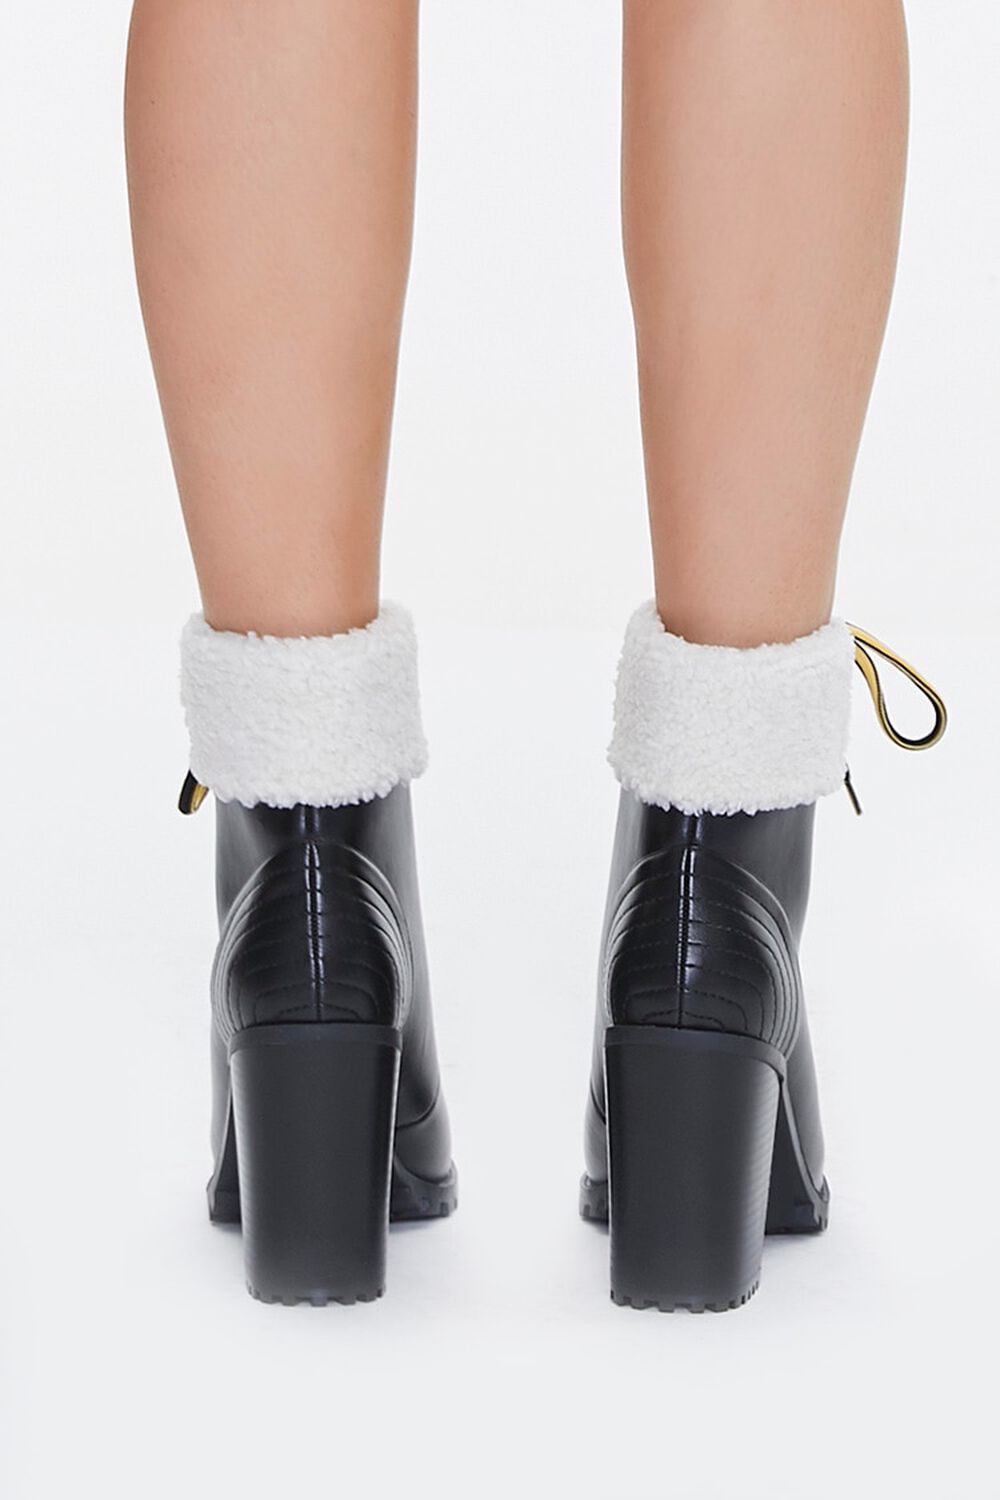 BLACK Faux Leather & Faux Shearling Ankle Boots, image 3